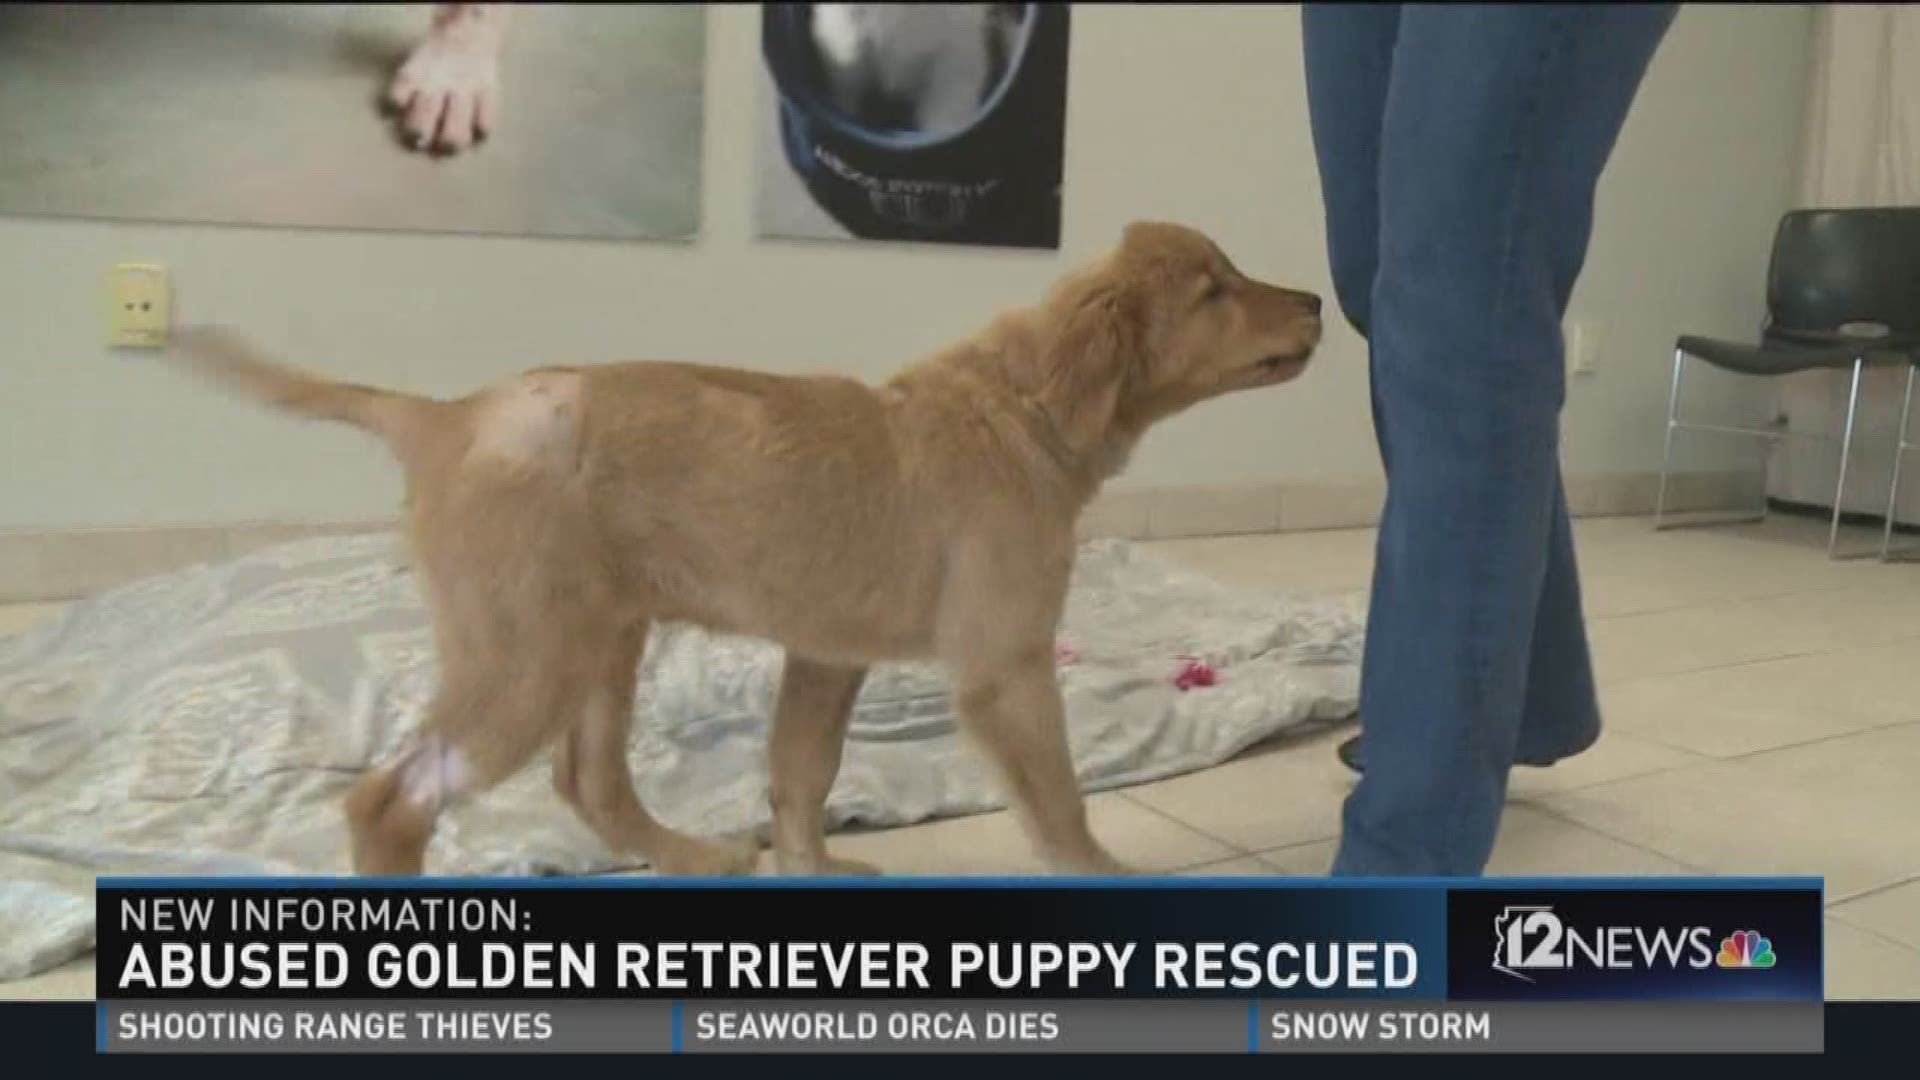 Abused golden retriever puppy rescued.